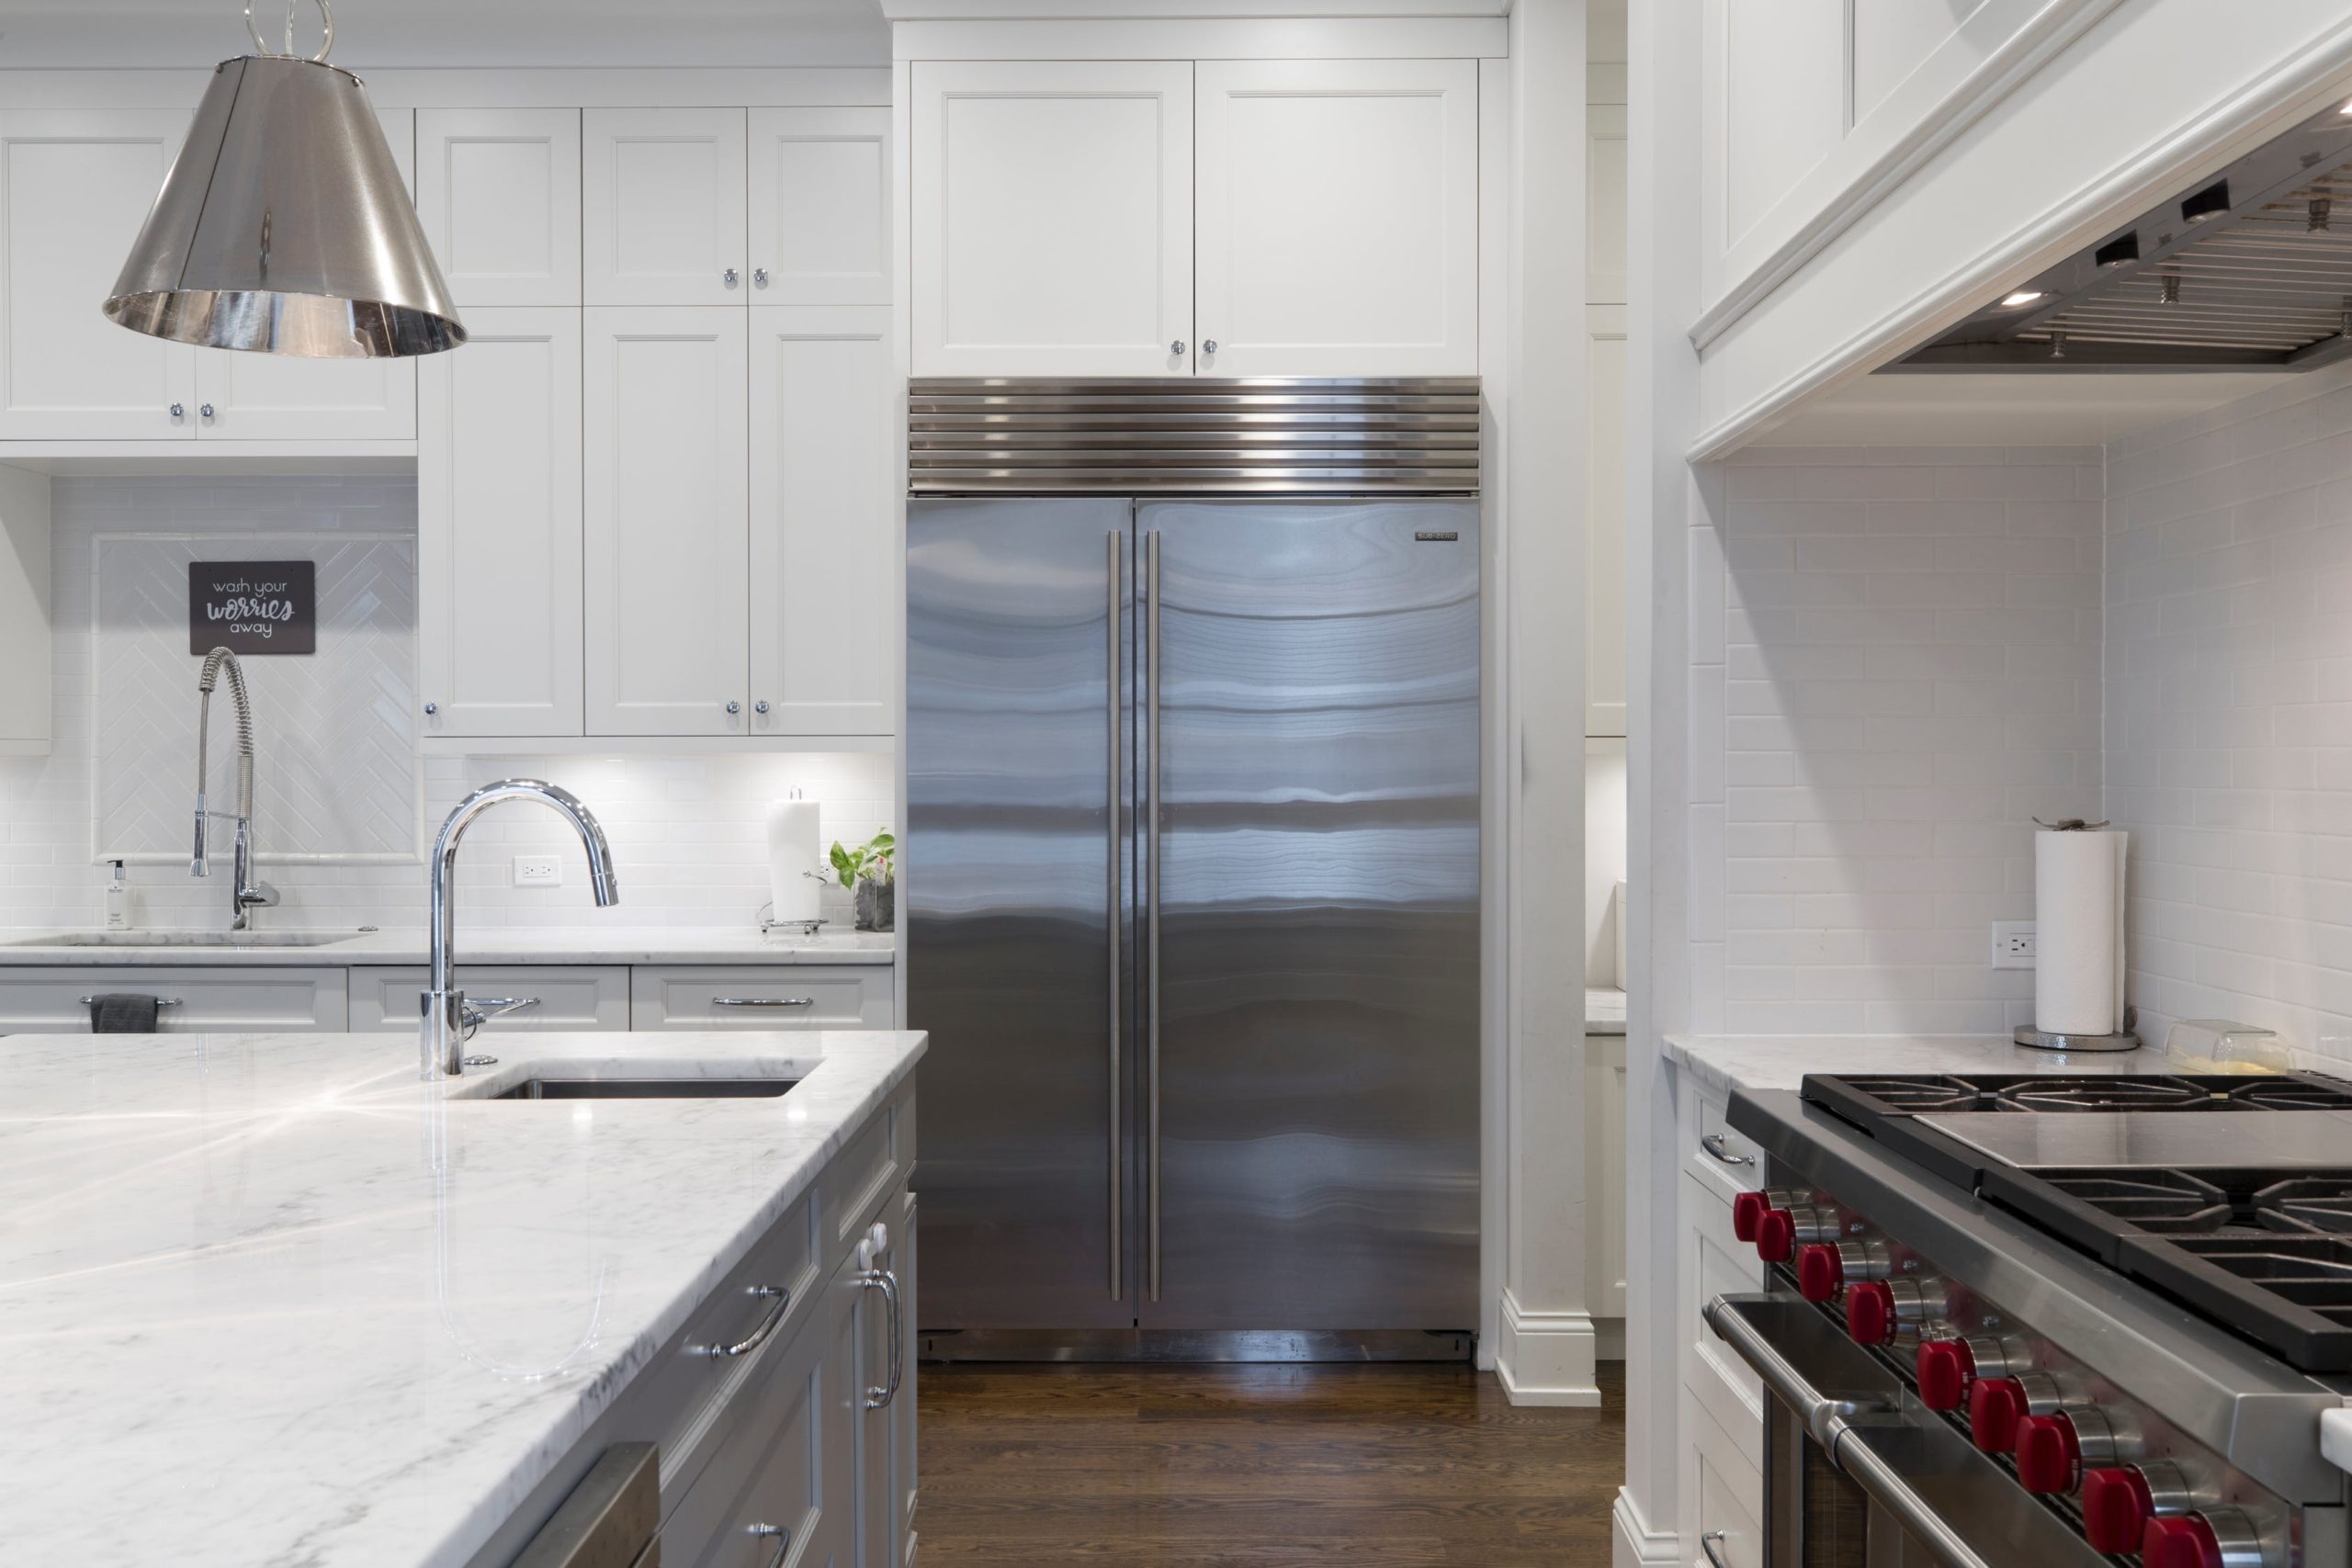 What to Consider When Buying Home Appliances